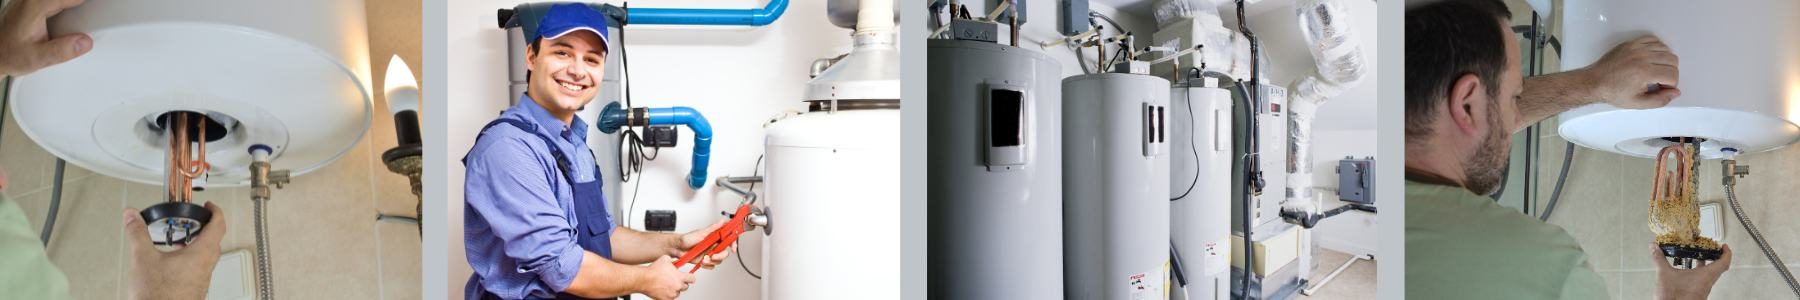 Water Heater Replacement Service in Dubai Cover Banner